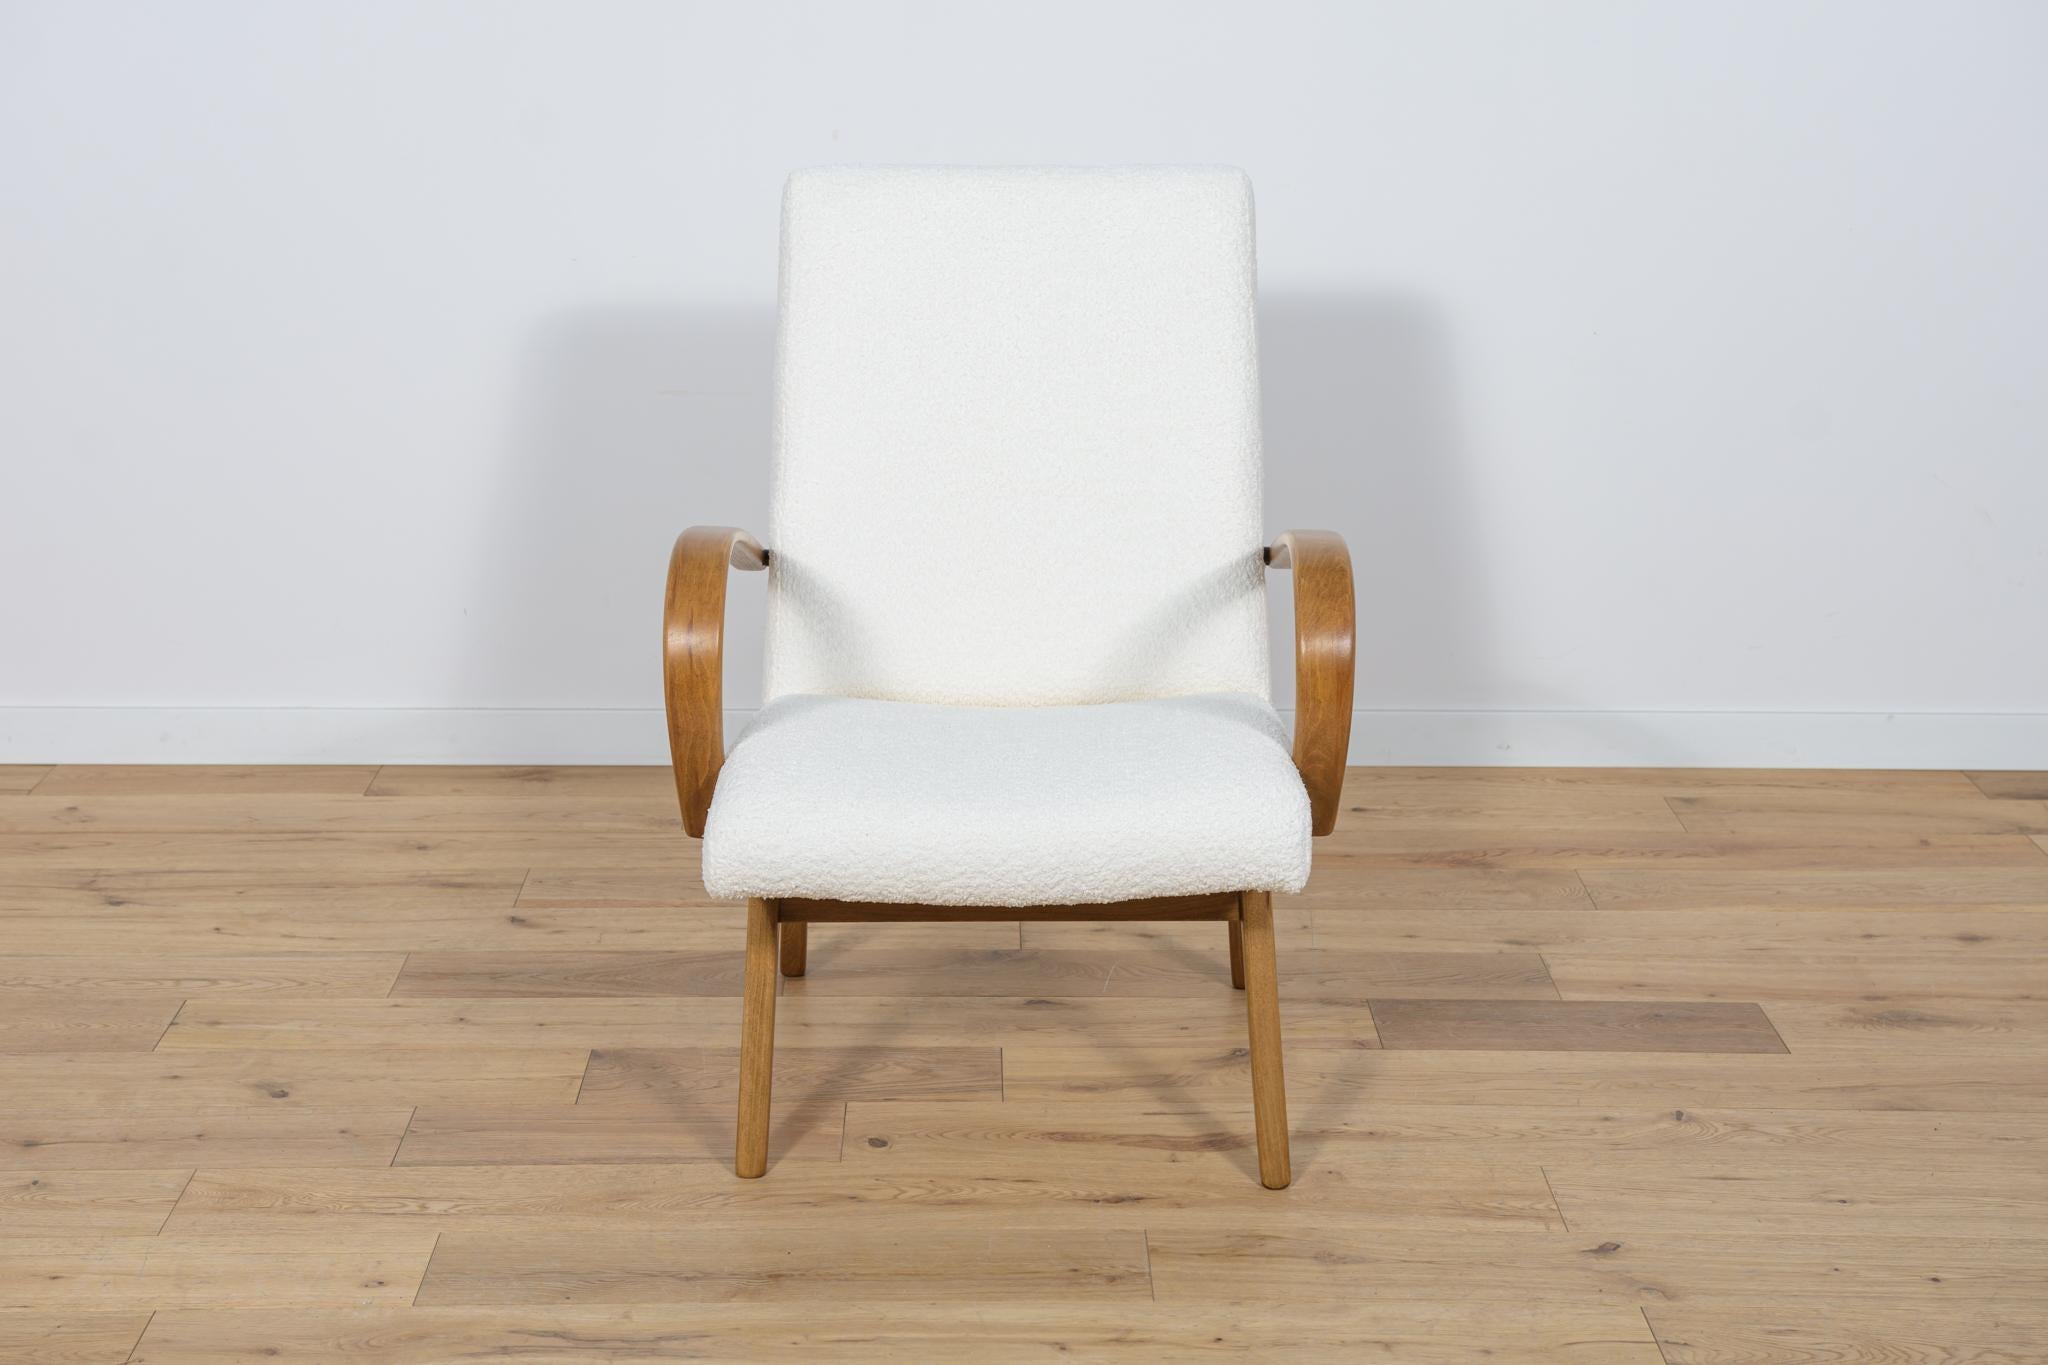 Model 53 armchair was manufactured by Ton in the 1950s to 1960s. They were designed by Jaroslav Smidek. The upholstery interior has been changed and covered with a high-quality white colored fabric typ boucle. The frame is in bent beech. The beech